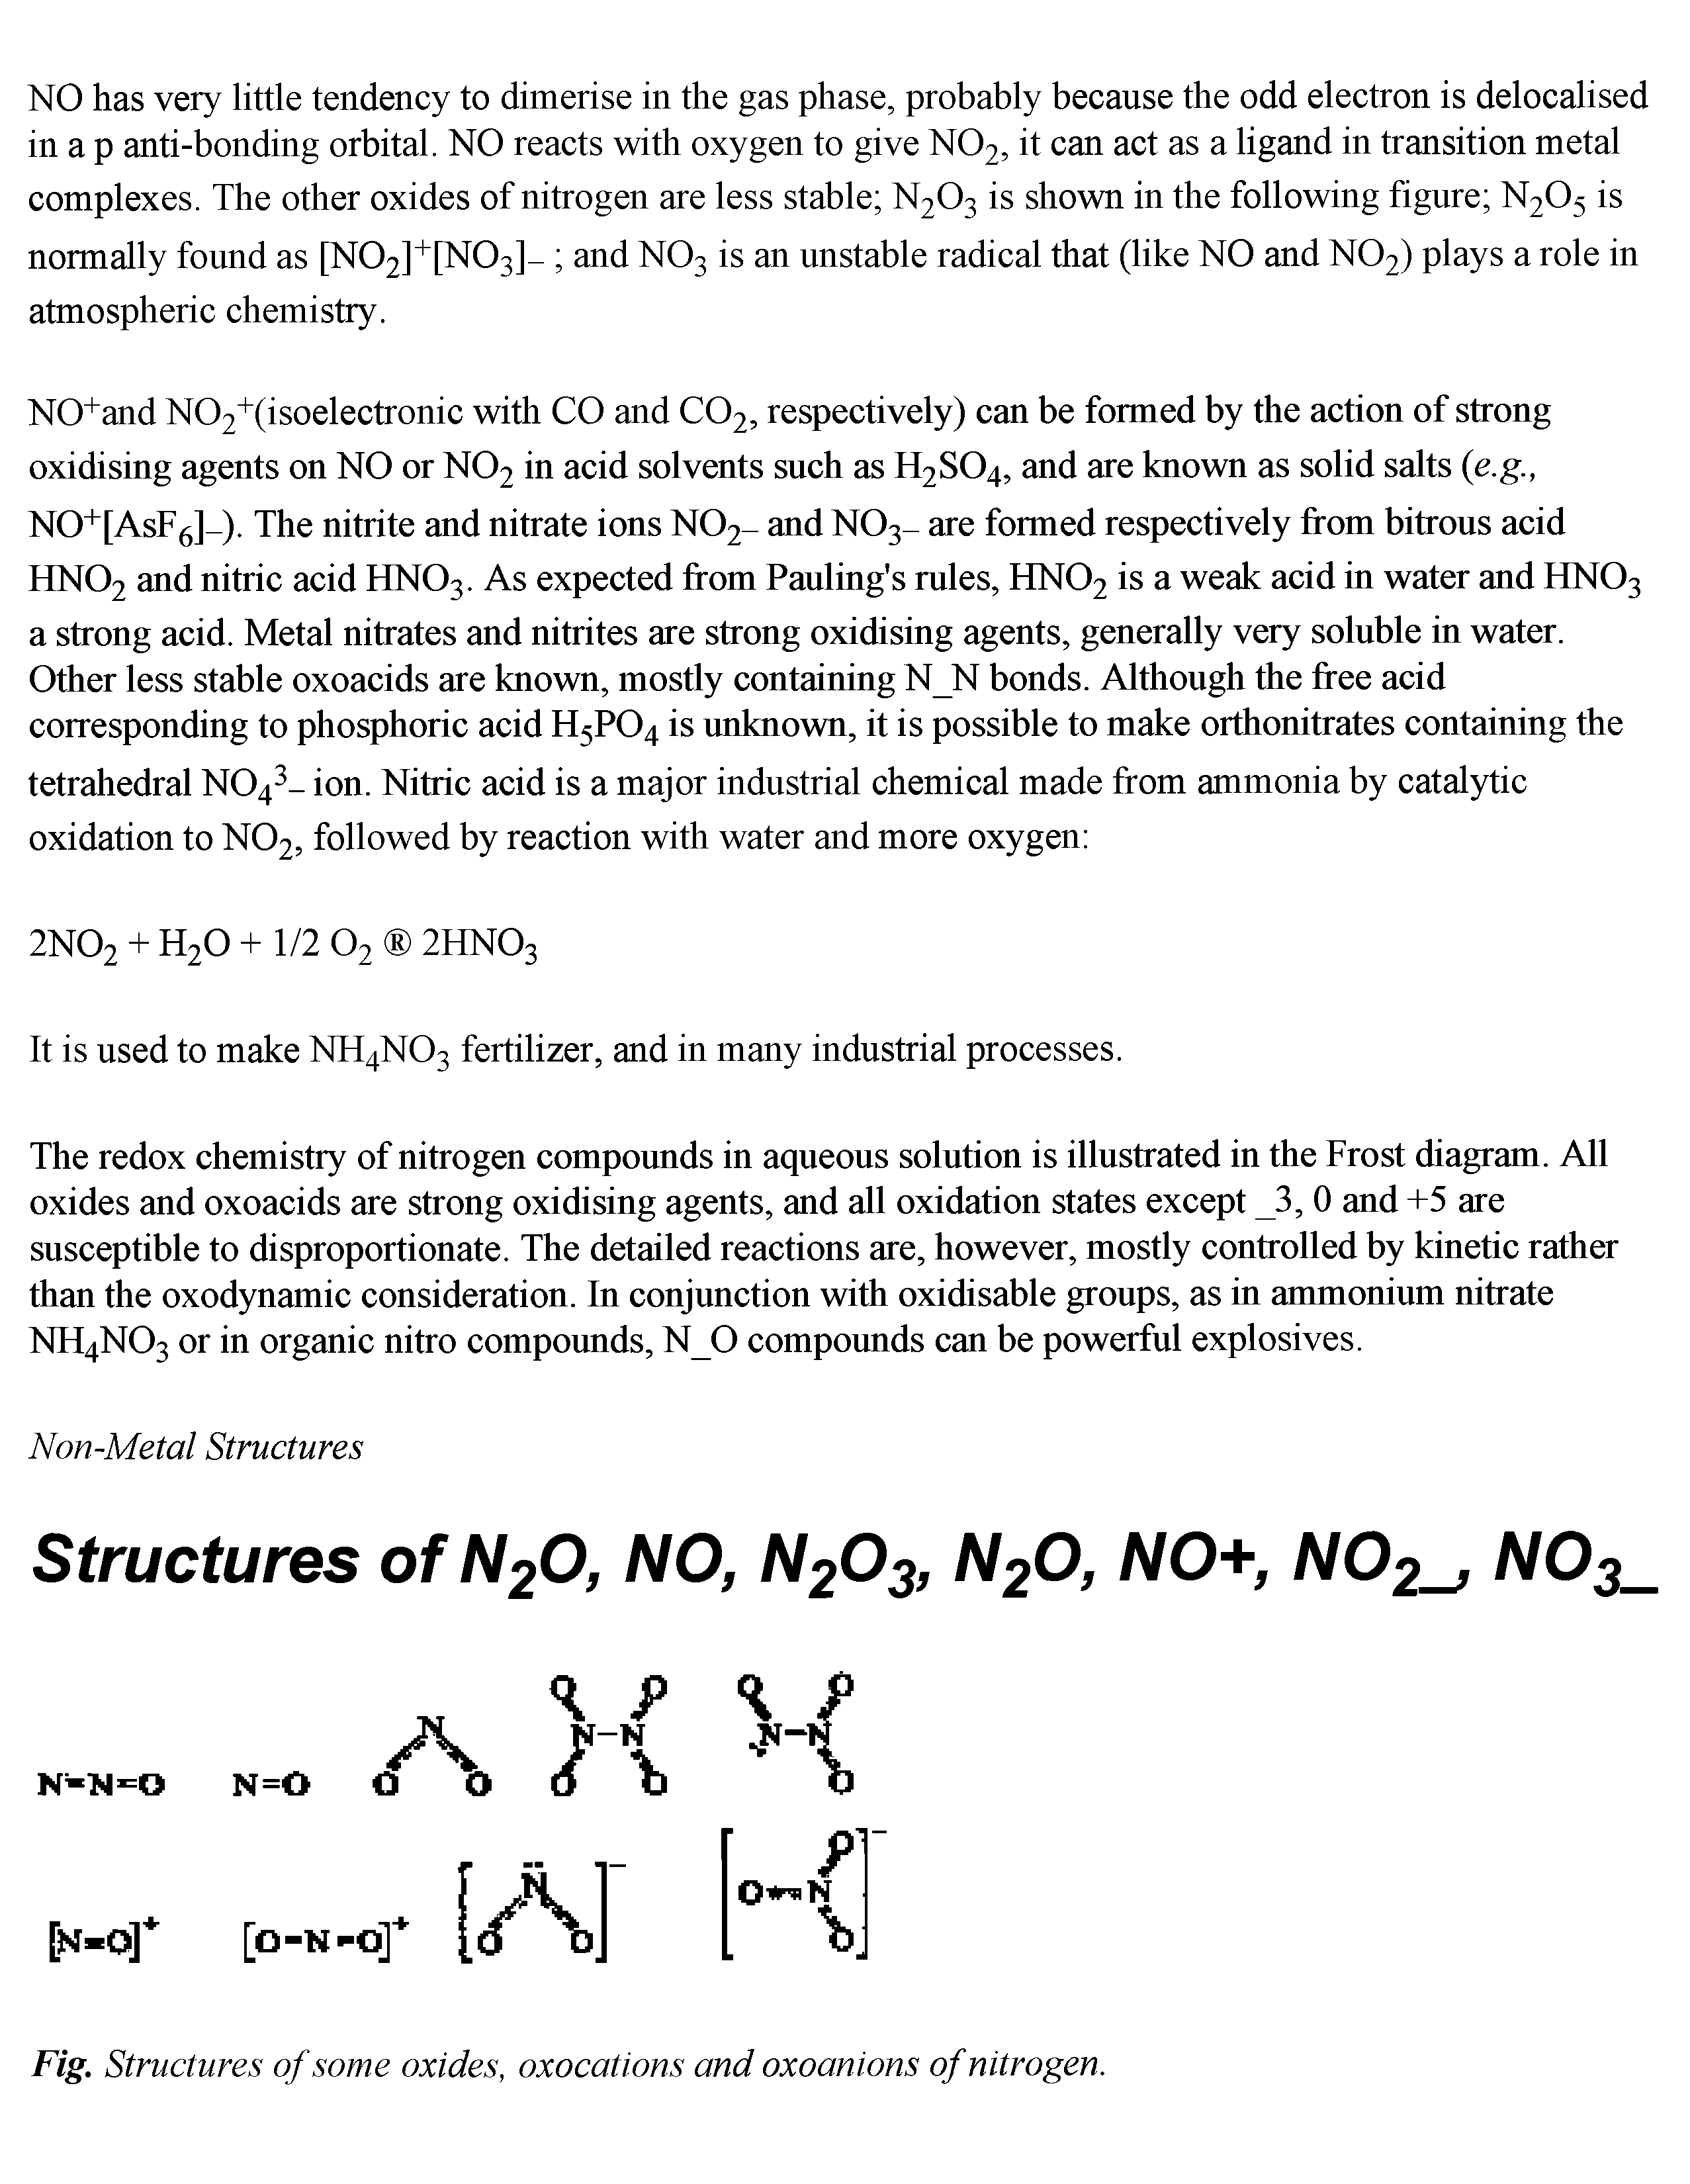 Fig. Structures of some oxides, oxocations and oxoanions of nitrogen.